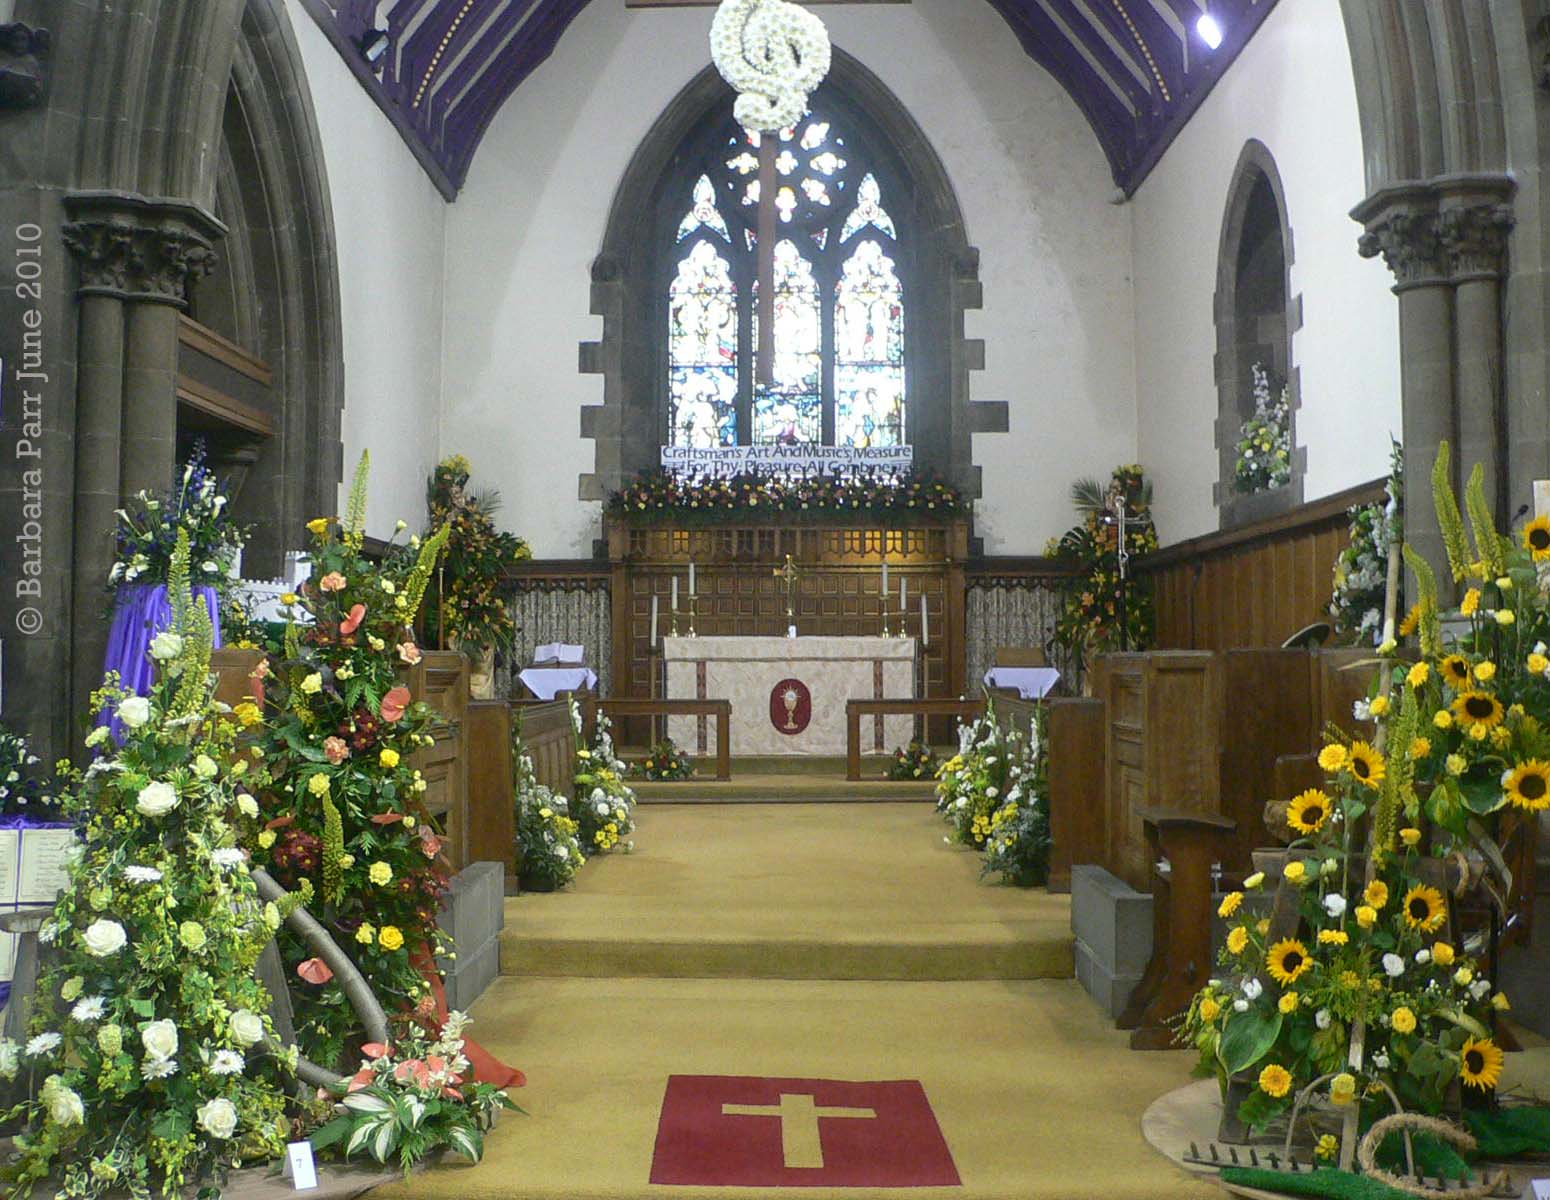 The church decorated for the Flower Festival